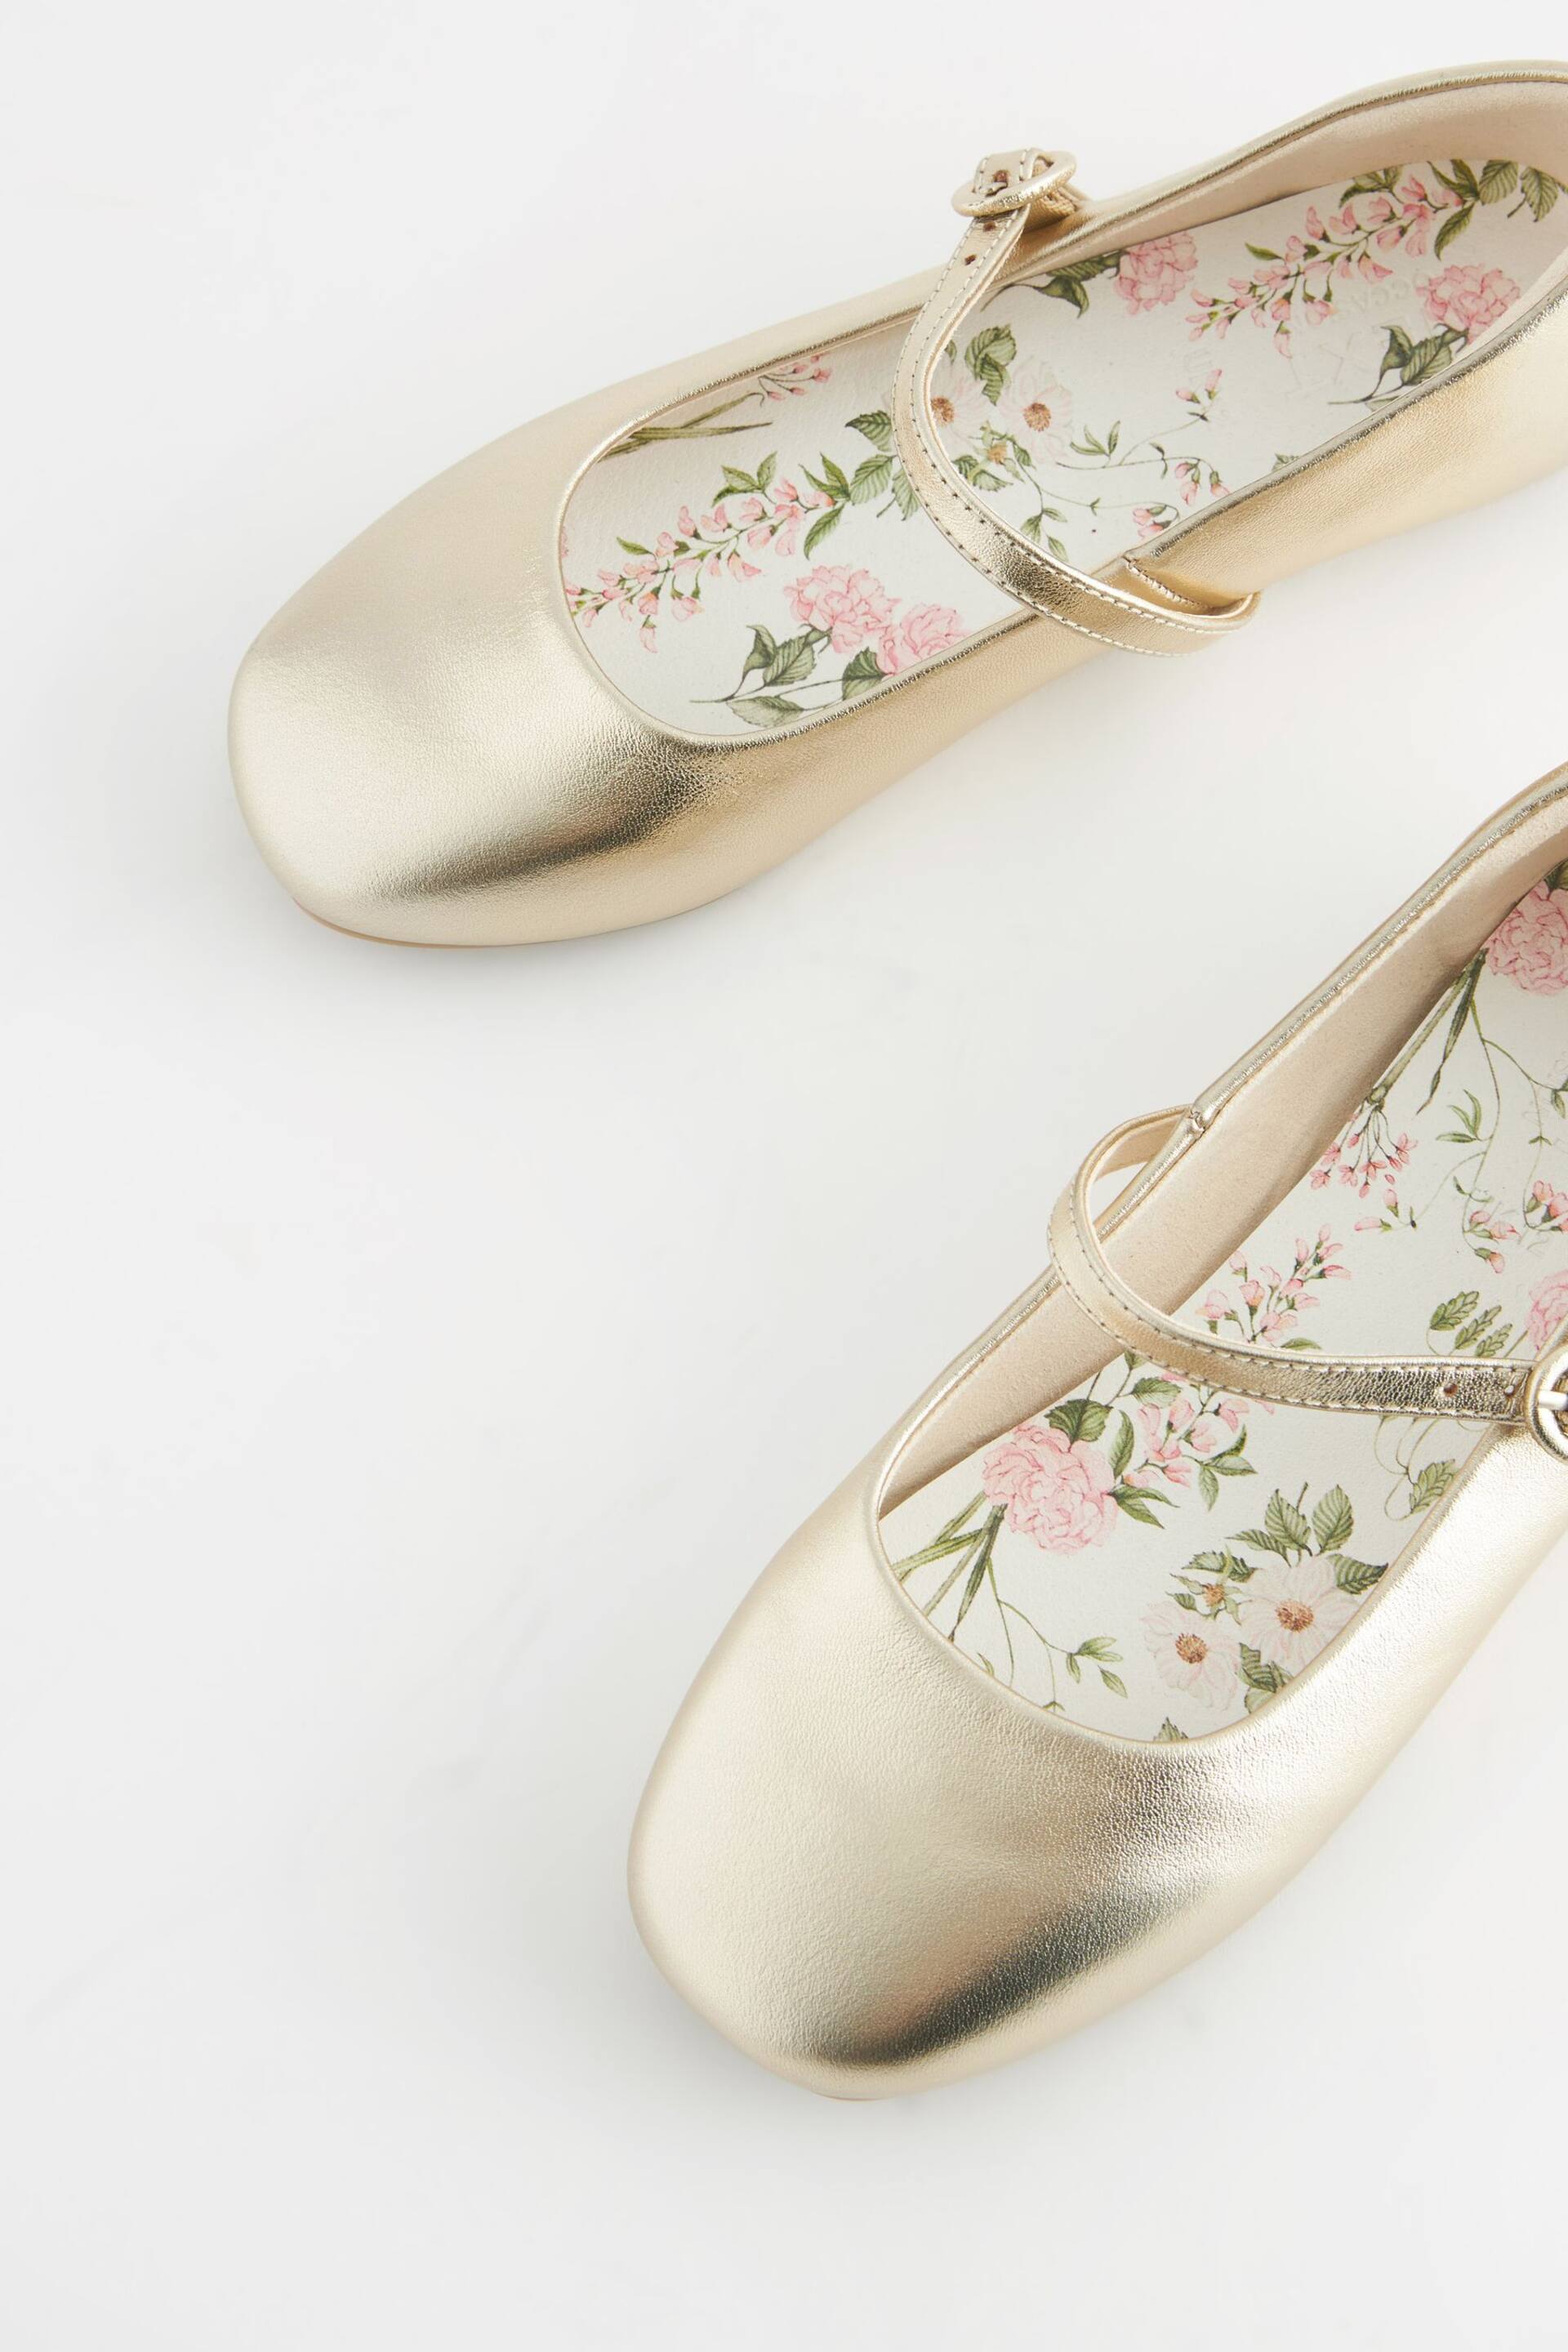 Gold Metallic Leather Mary Jane Occasion Shoes - Image 5 of 6